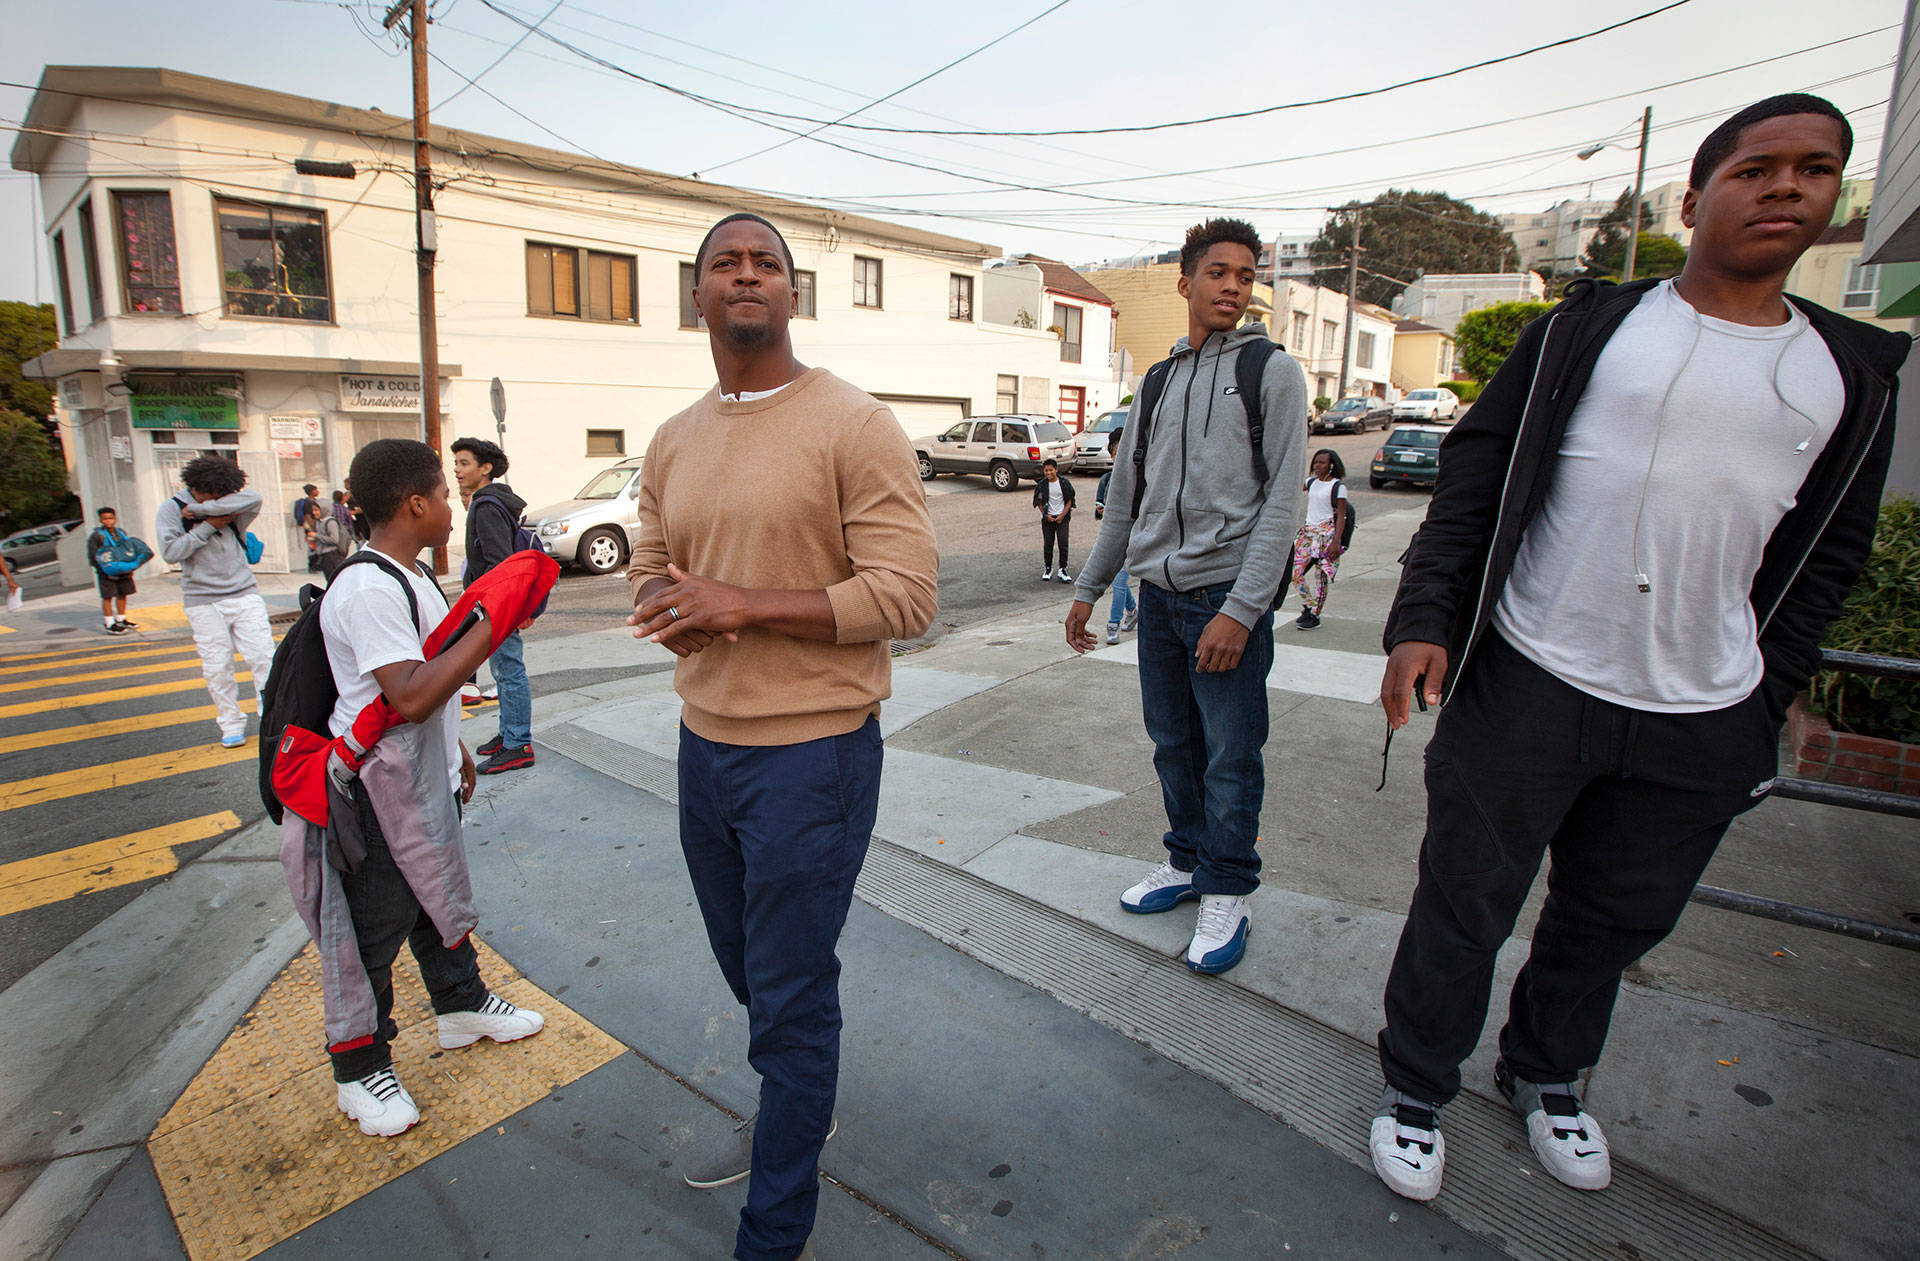 Principal Charleston Brown oversees dismissal at Willie L. Brown Jr. Middle School in San Francisco’s Bayview neighborhood. His black students struggle to pass state tests in reading and math. Penni Gladstone/CALmatters